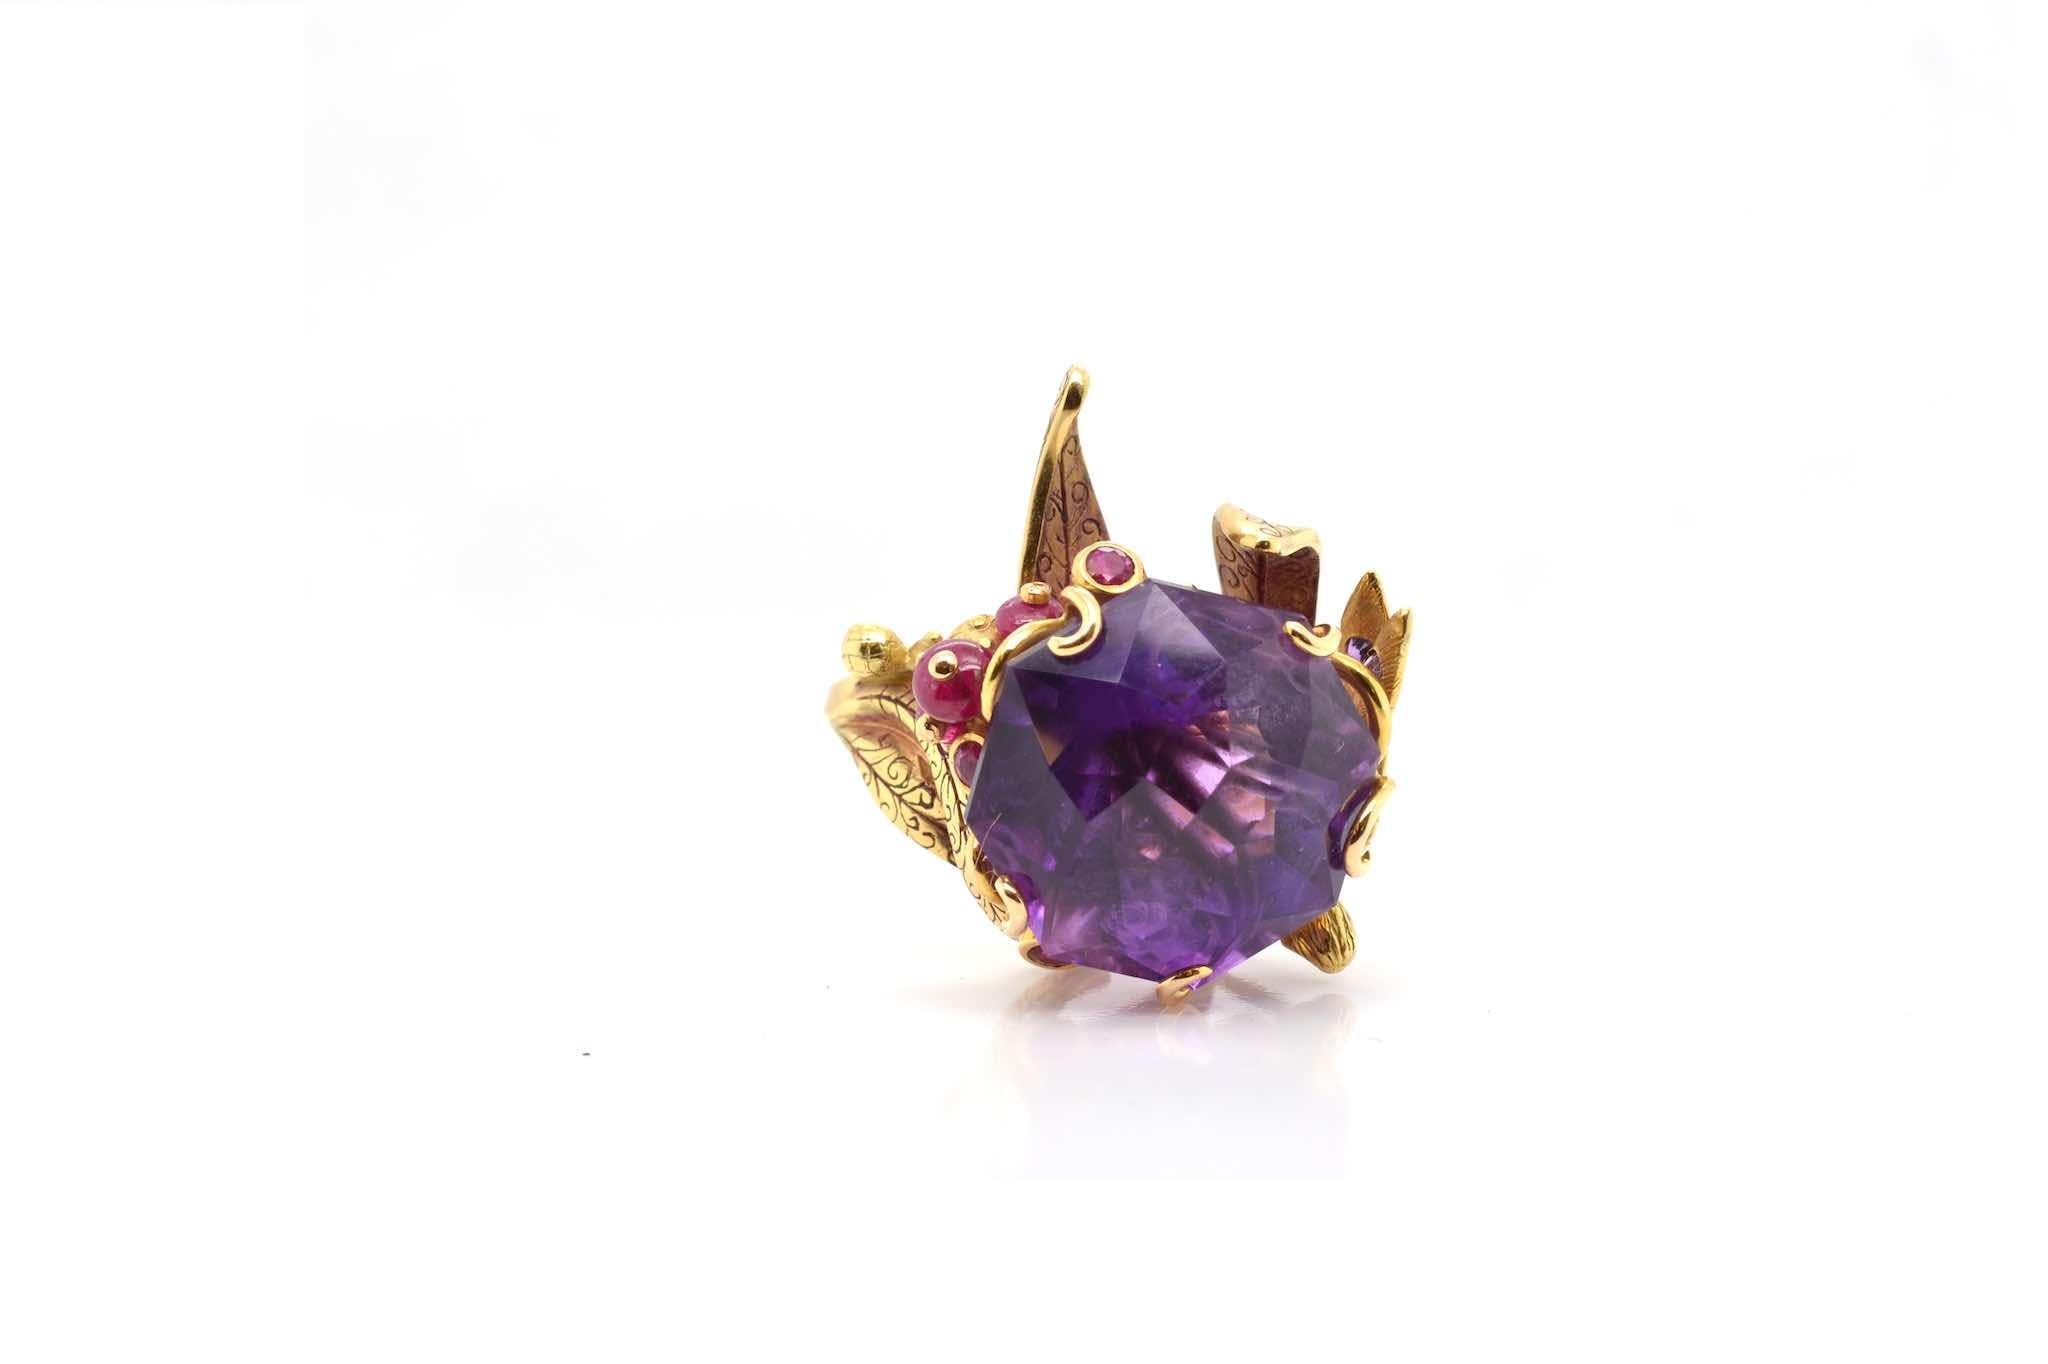 Stones: Central amethyst, small rubies, amethysts, and diamond.
Material: 18k yellow gold
Dimensions: 3 x 2.4 cm, 1.8 cm high
Weight: 20g
Size: 48 (free sizing)
Certificate
Ref. : 24772